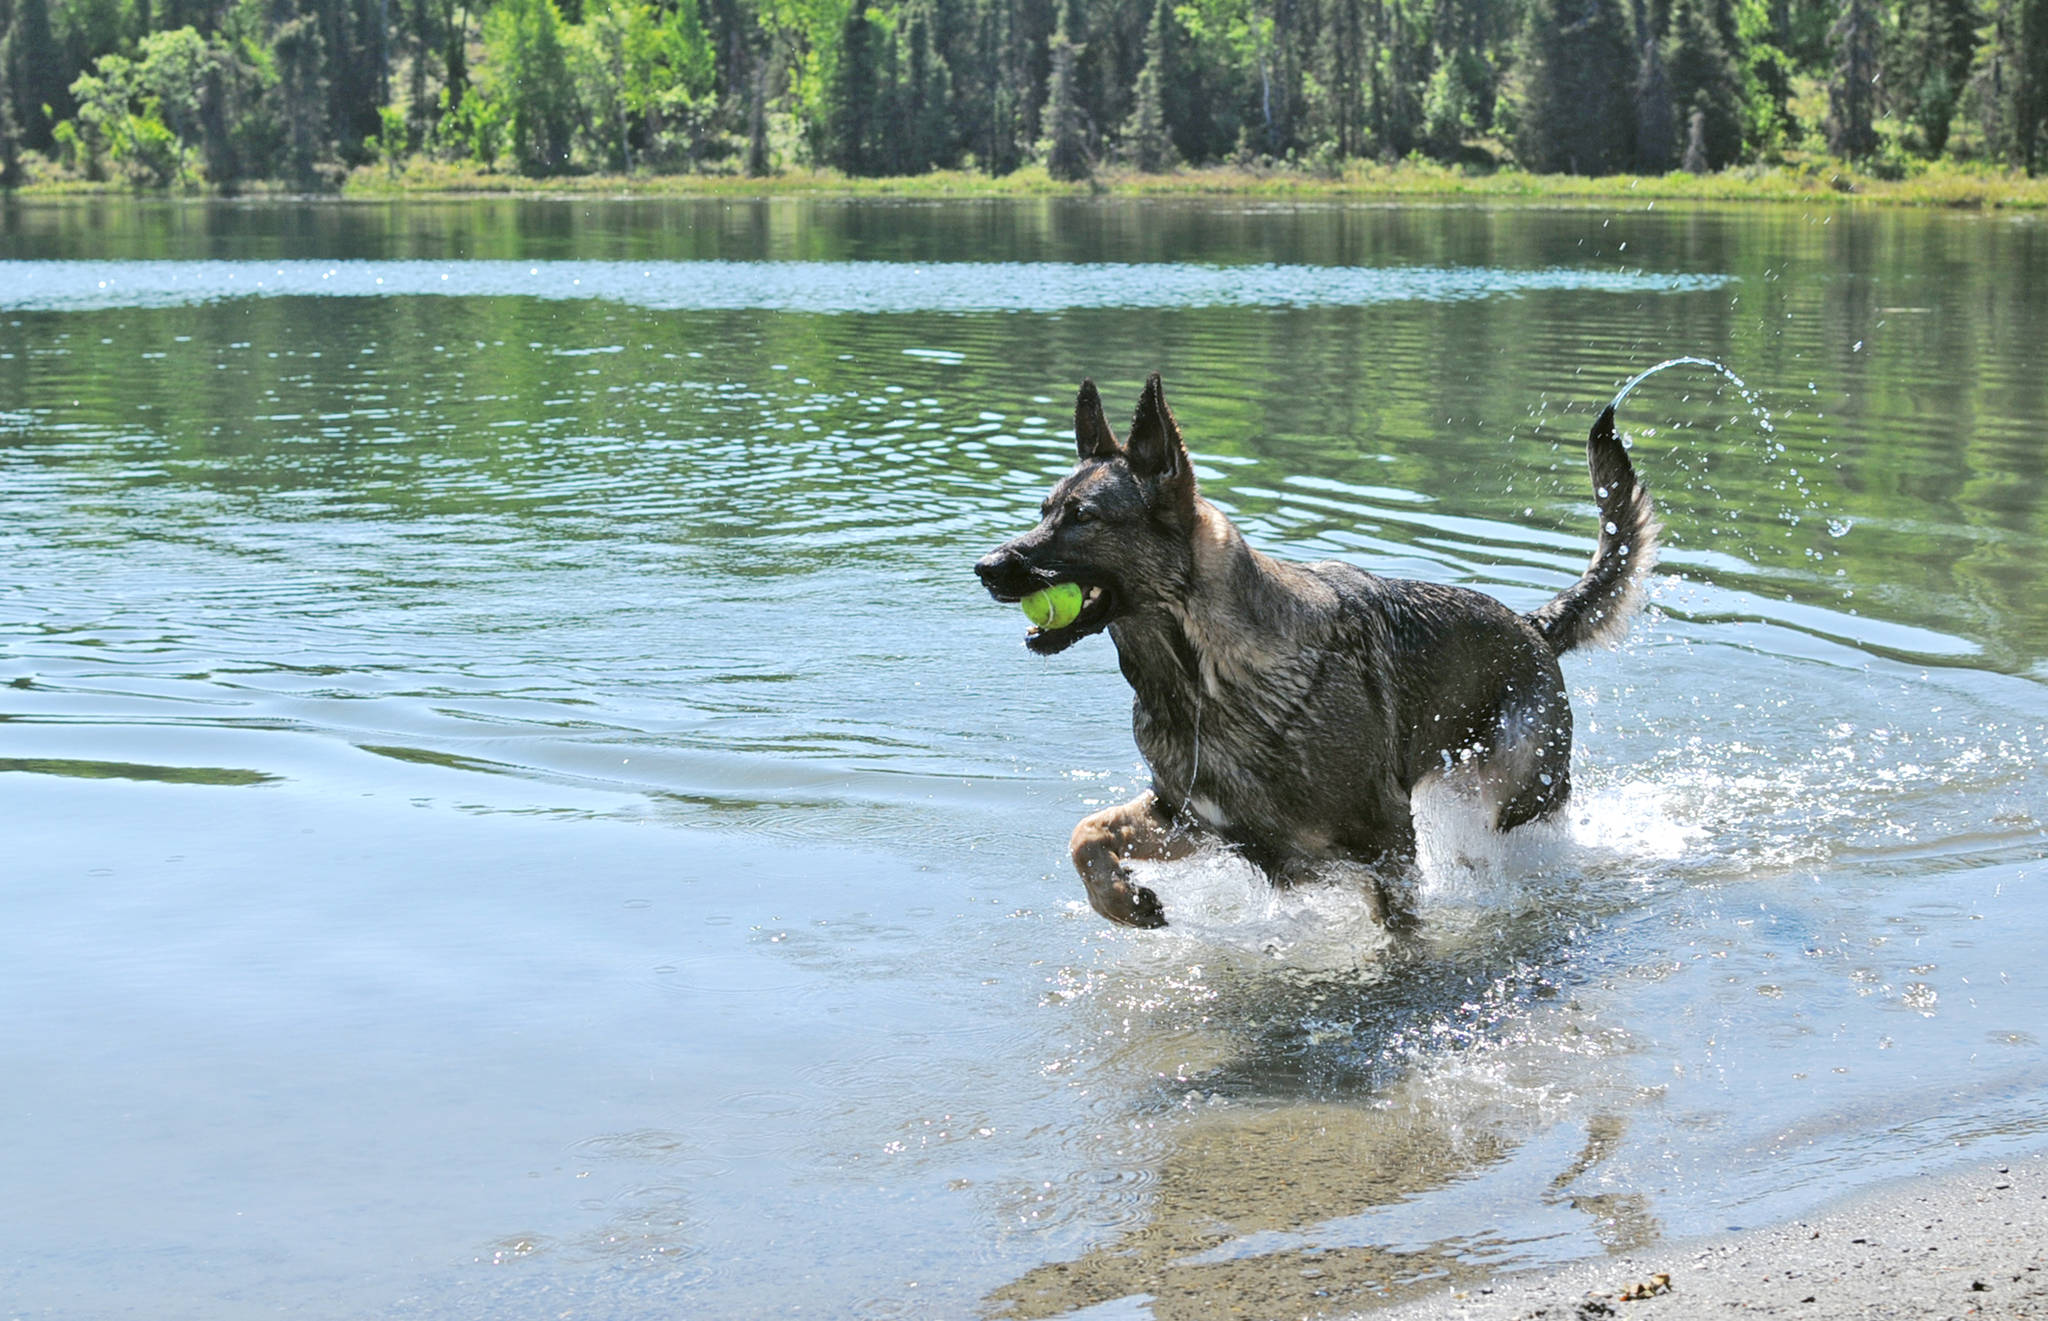 Nadia the German shepherd retrieves a tennis ball from Arc Lake on Wednesday, June 14, 2018 in Soldotna, Alaska. Wednesday brought sunny skies and temperatures in the mid-60s across the central Kenai Peninsula, drawing people out to the parks and lakes to enjoy the weather. Vendors and food trucks were setting up shop in Soldotna Creek Park during the day as well for Soldotna’s weekly Wednesday Market and Music in the Park event, which takes place each week in the summer months. (Photo by Elizabeth Earl/Peninsula Clarion)